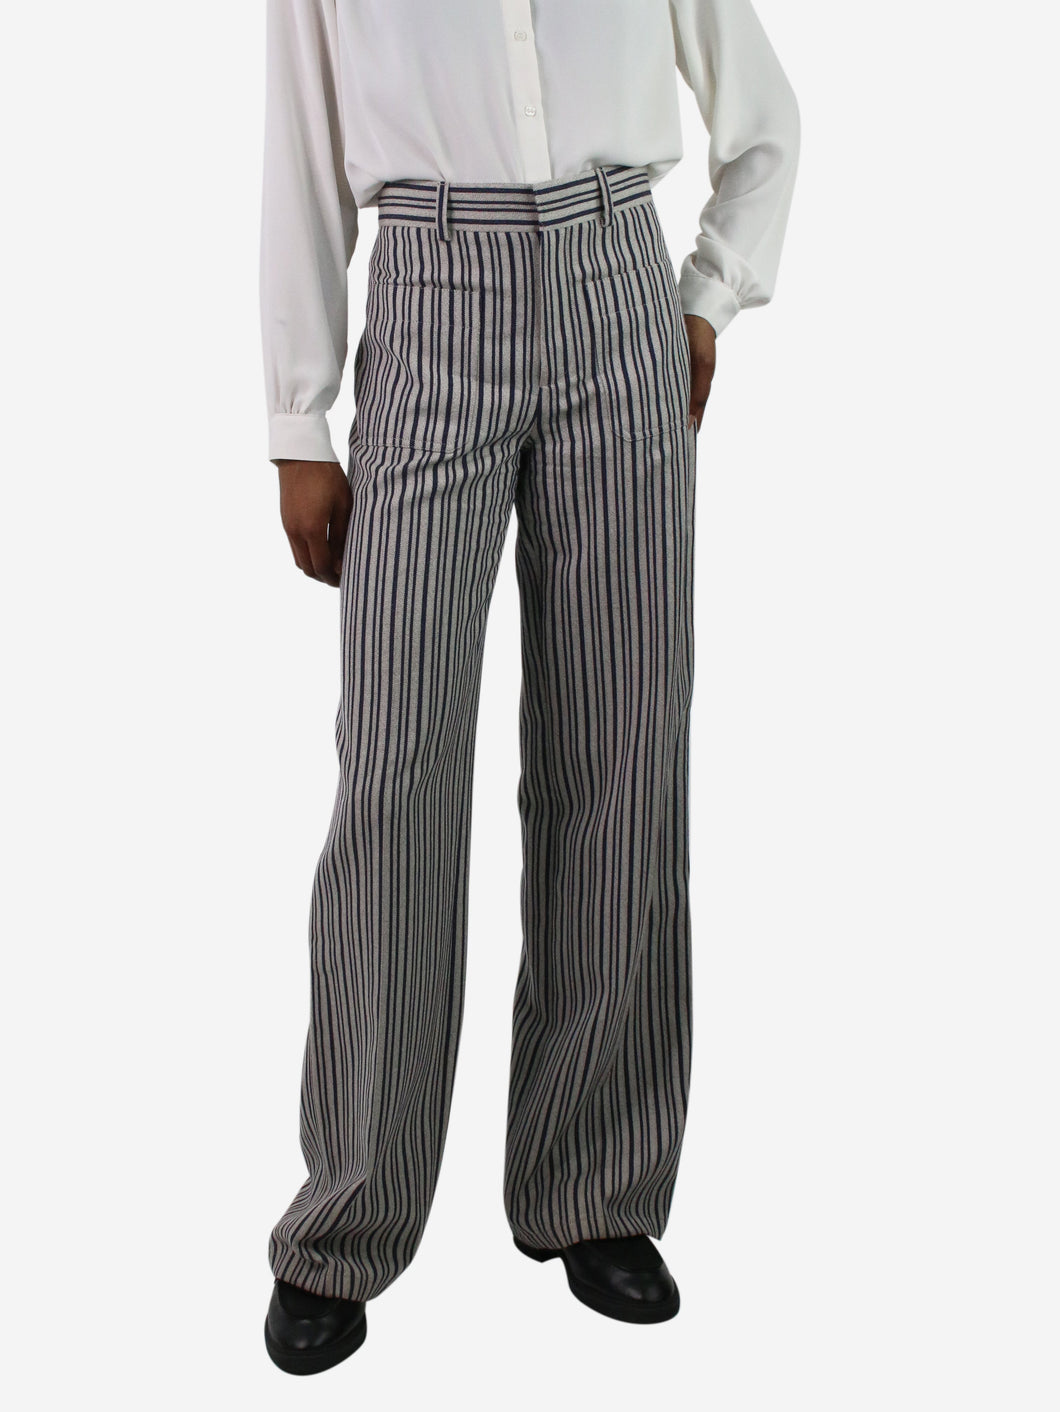 Grey striped trousers - size UK 6 Trousers Christian Dior 